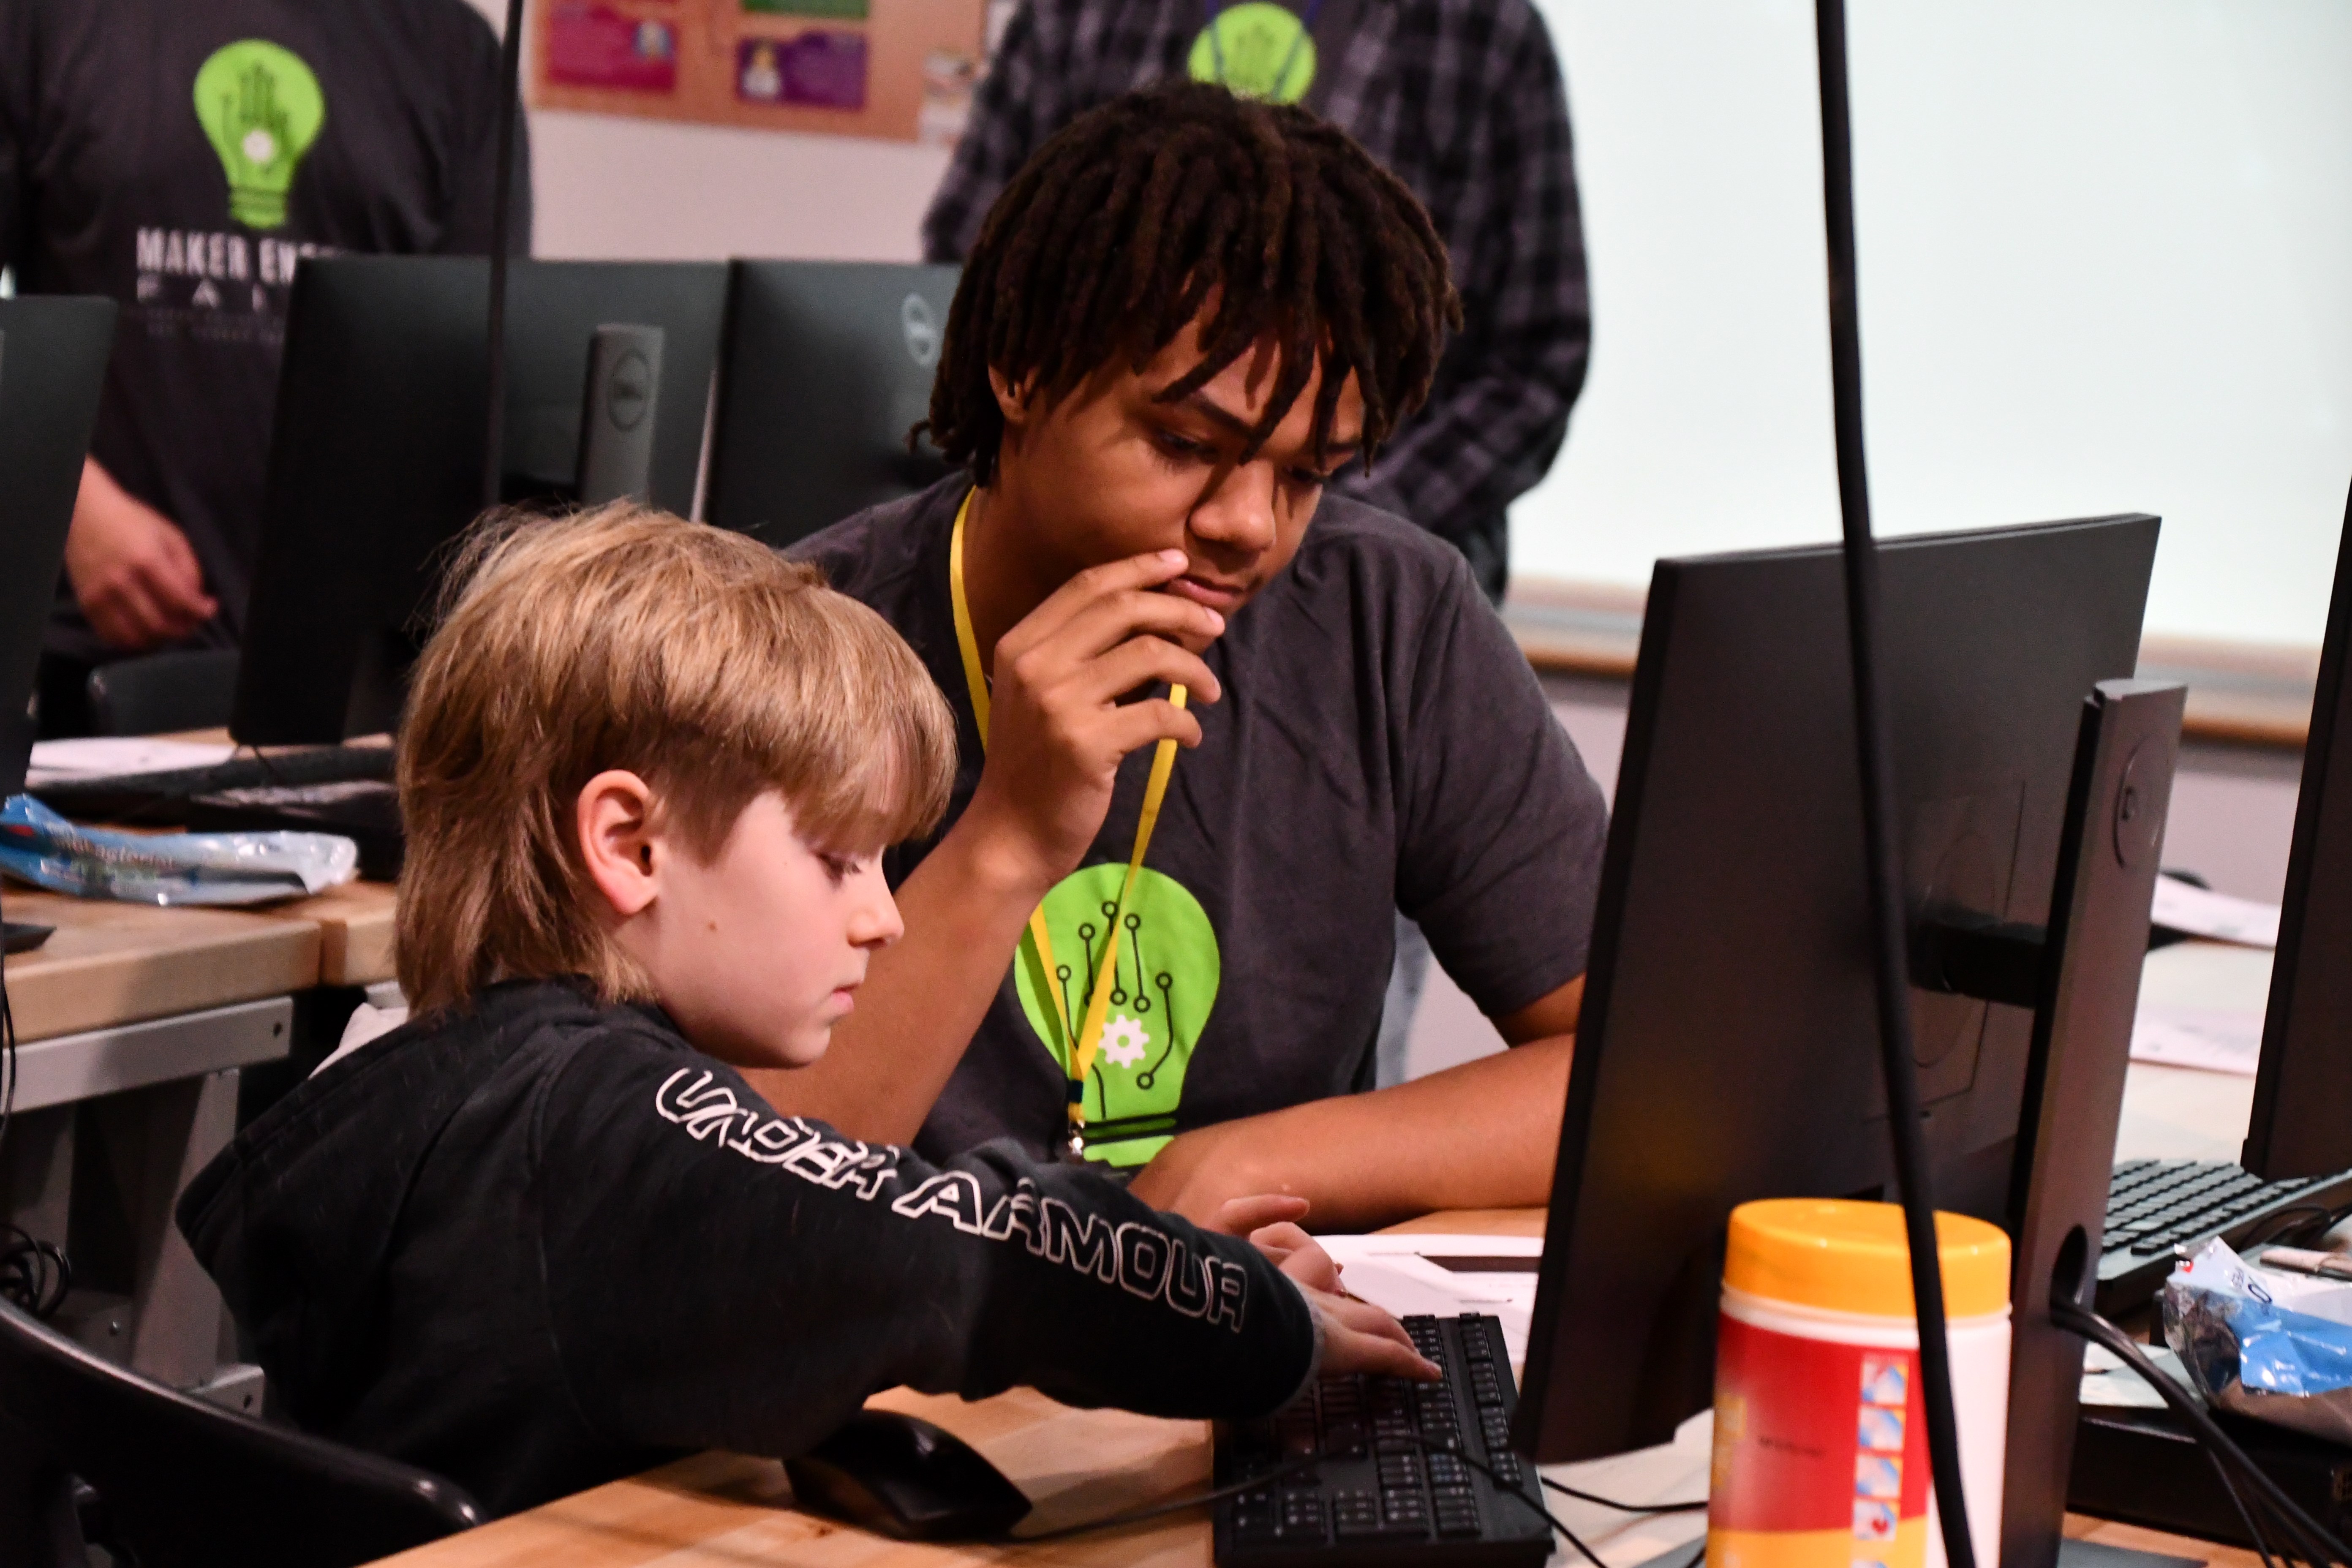 older student helping younger student code on a computer